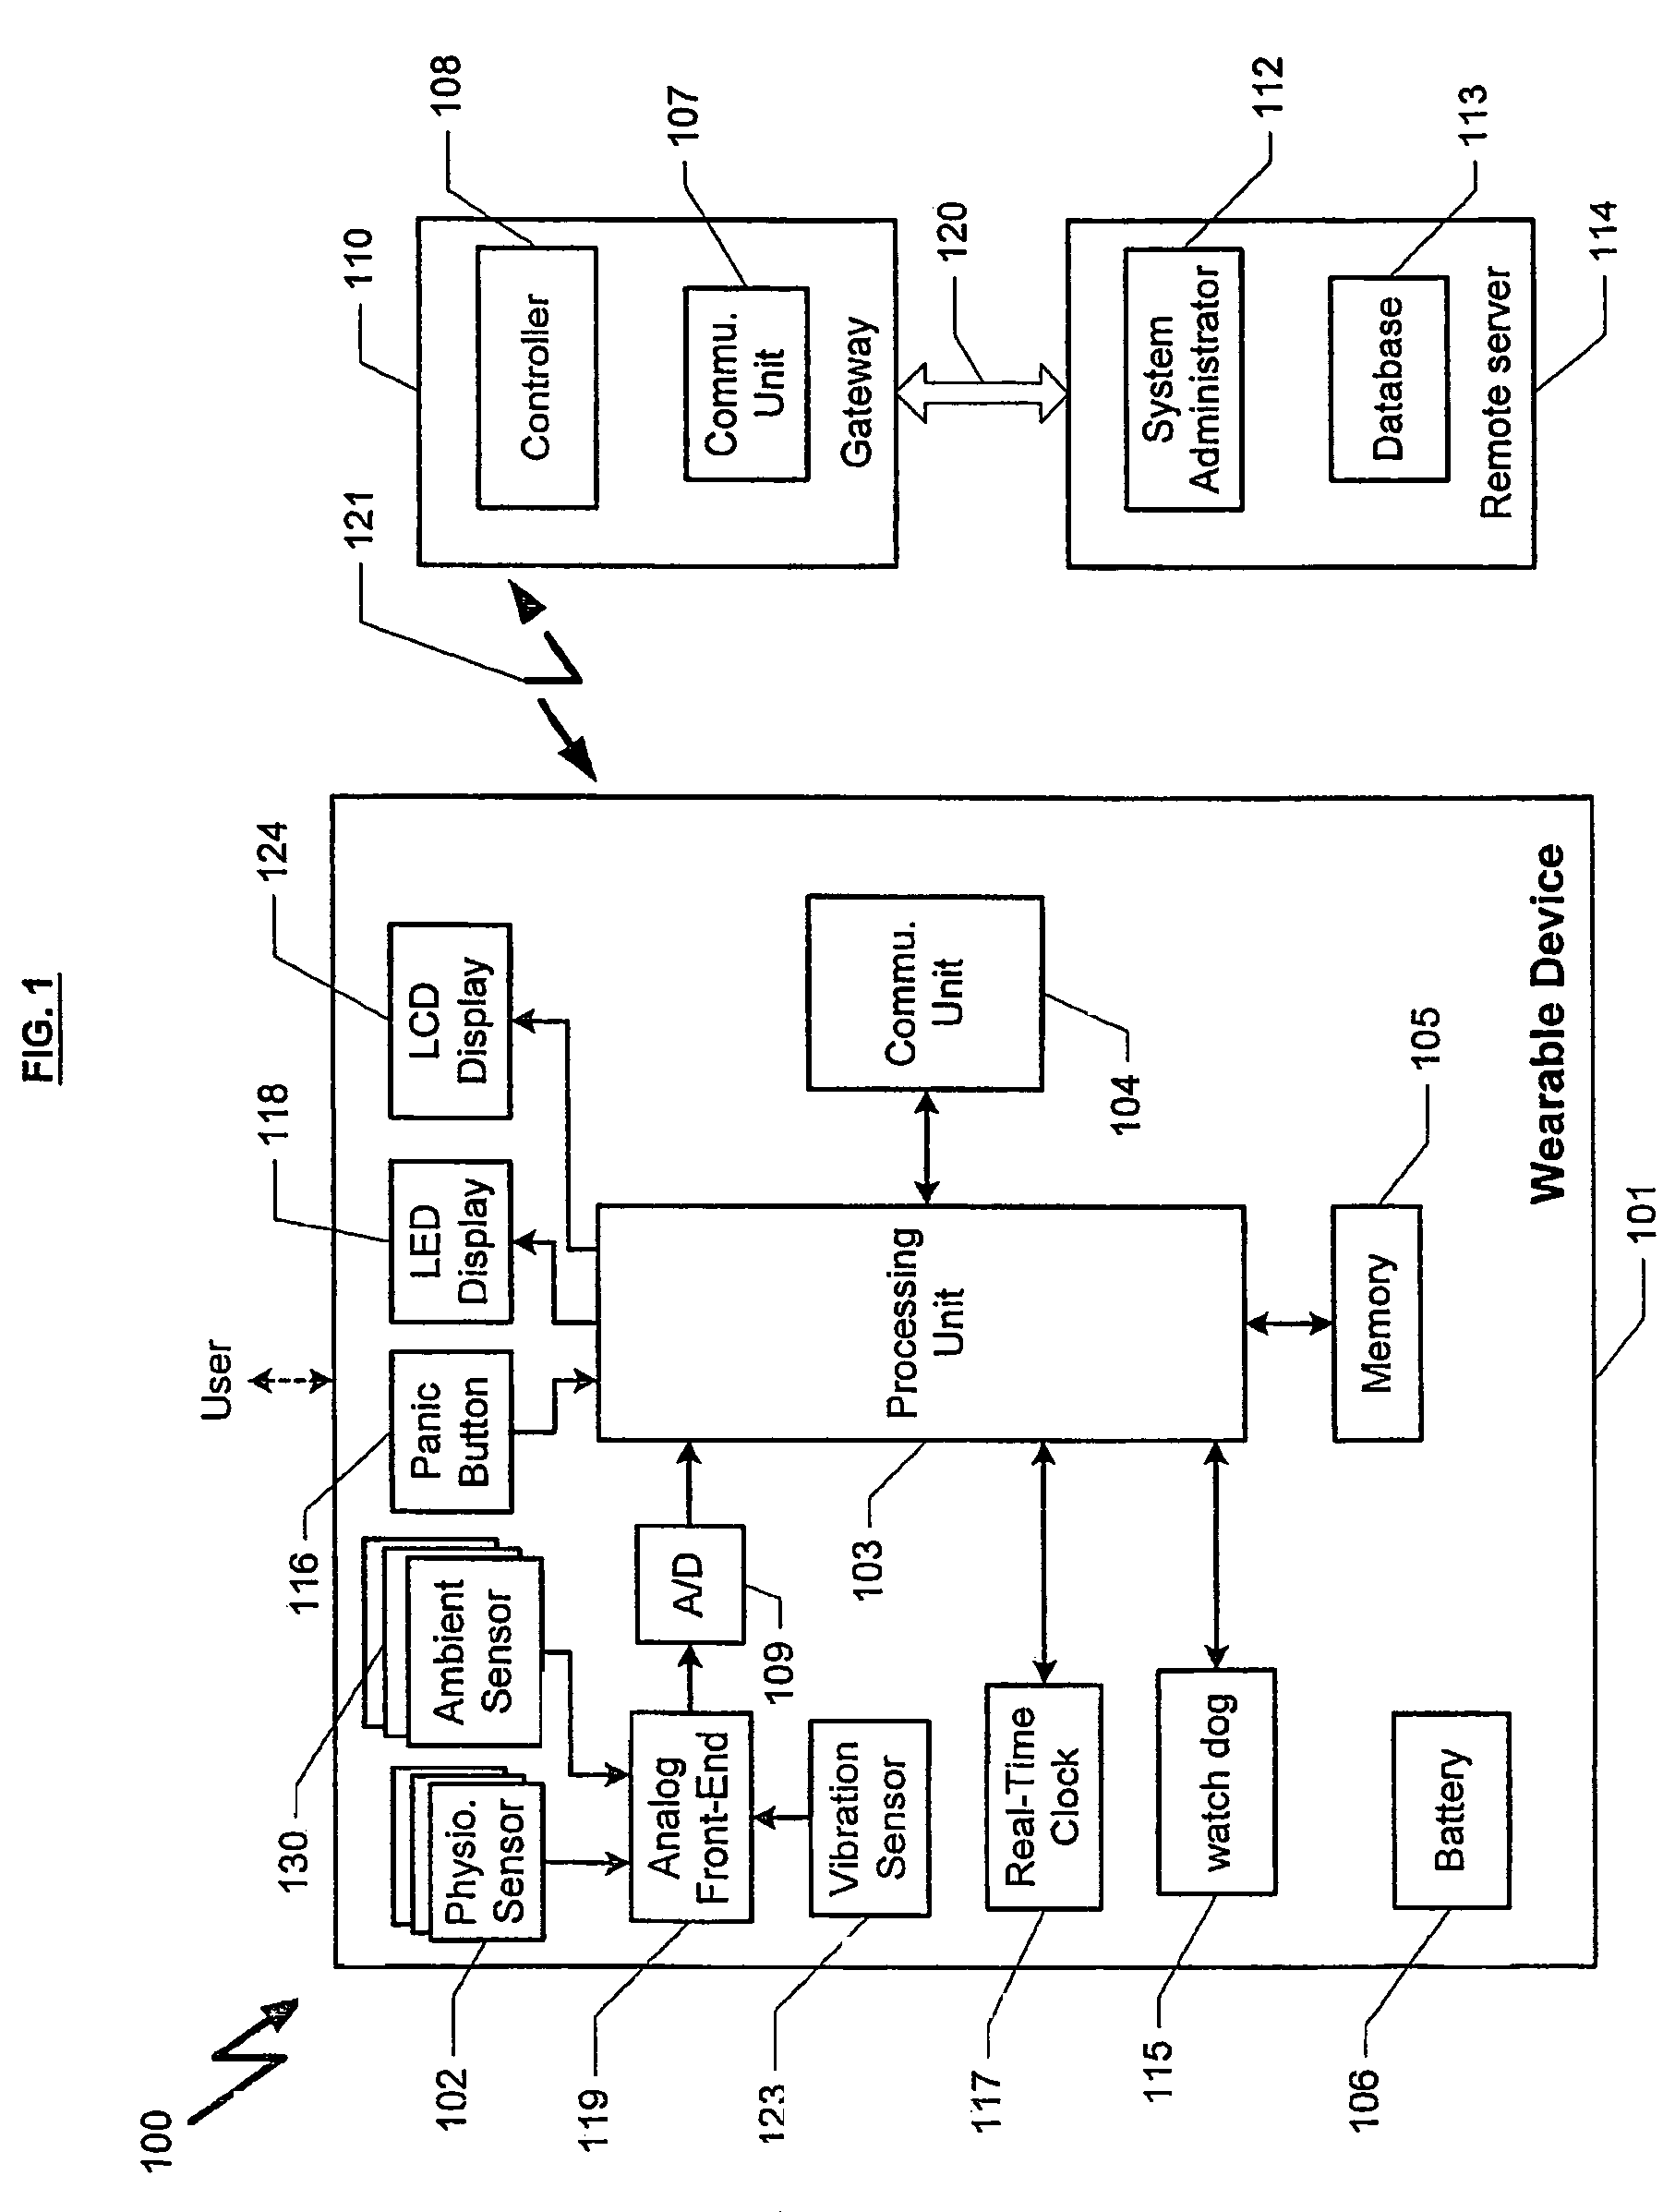 Method and device for measuring physiological parameters at the wrist